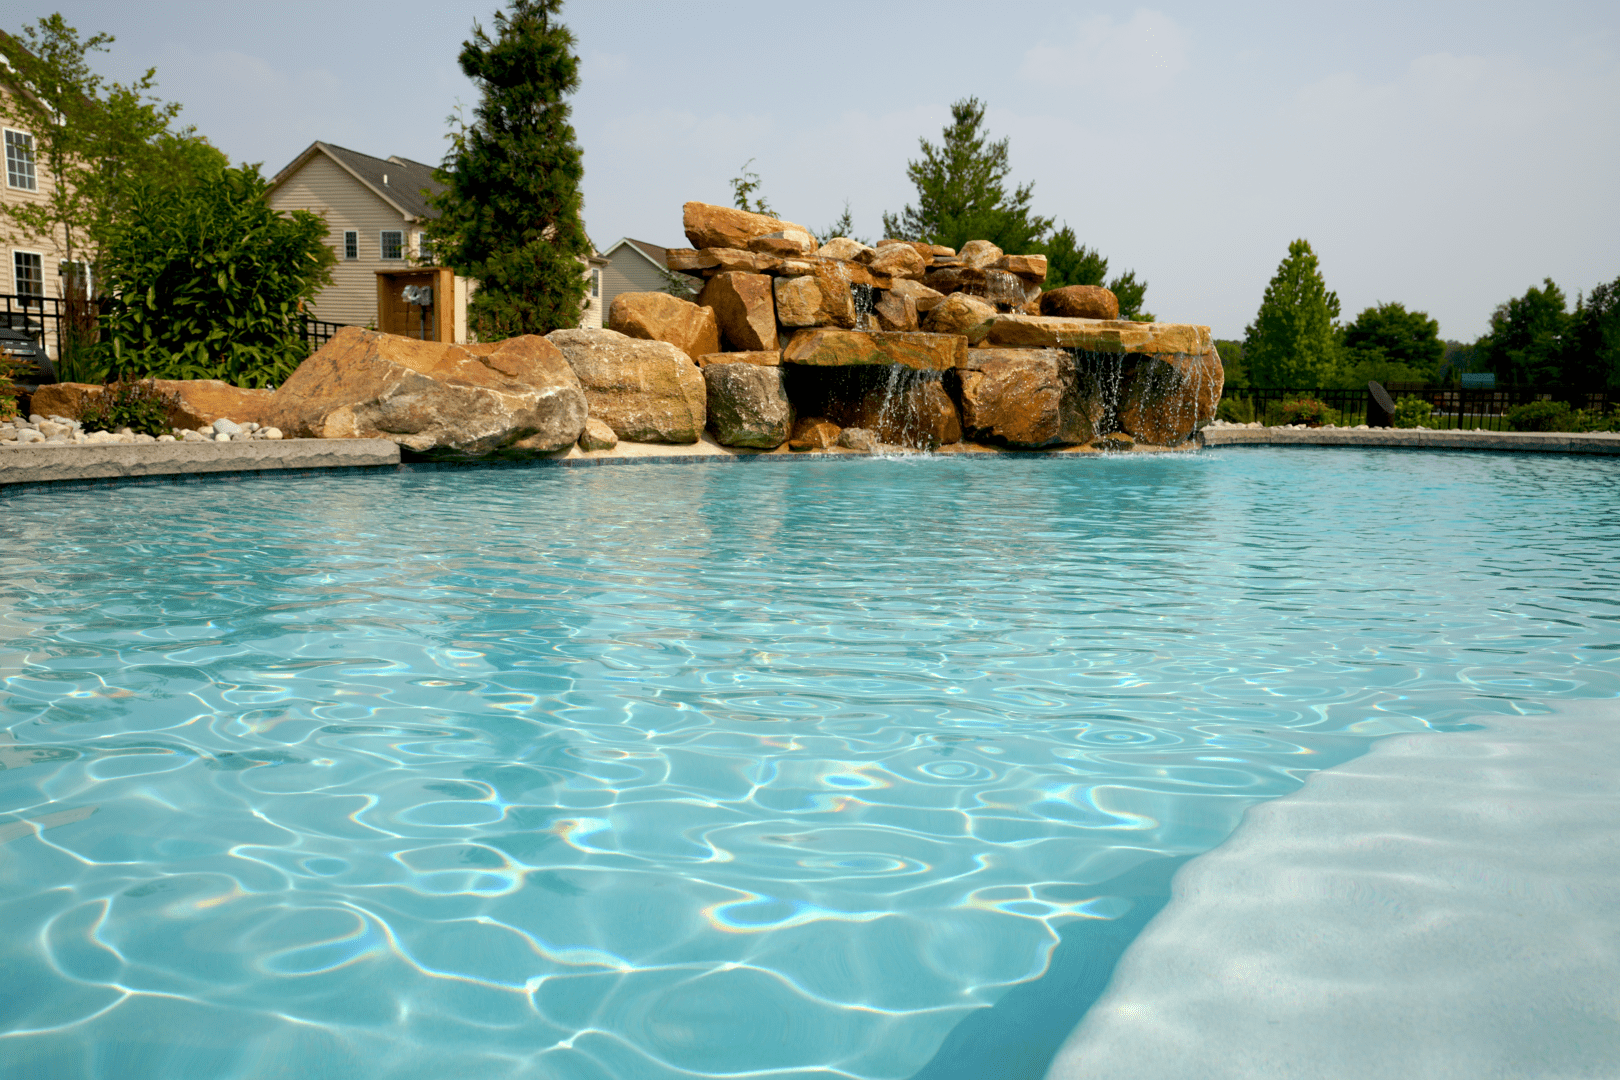 A vibrant blue swimming pool with a modern pool design.